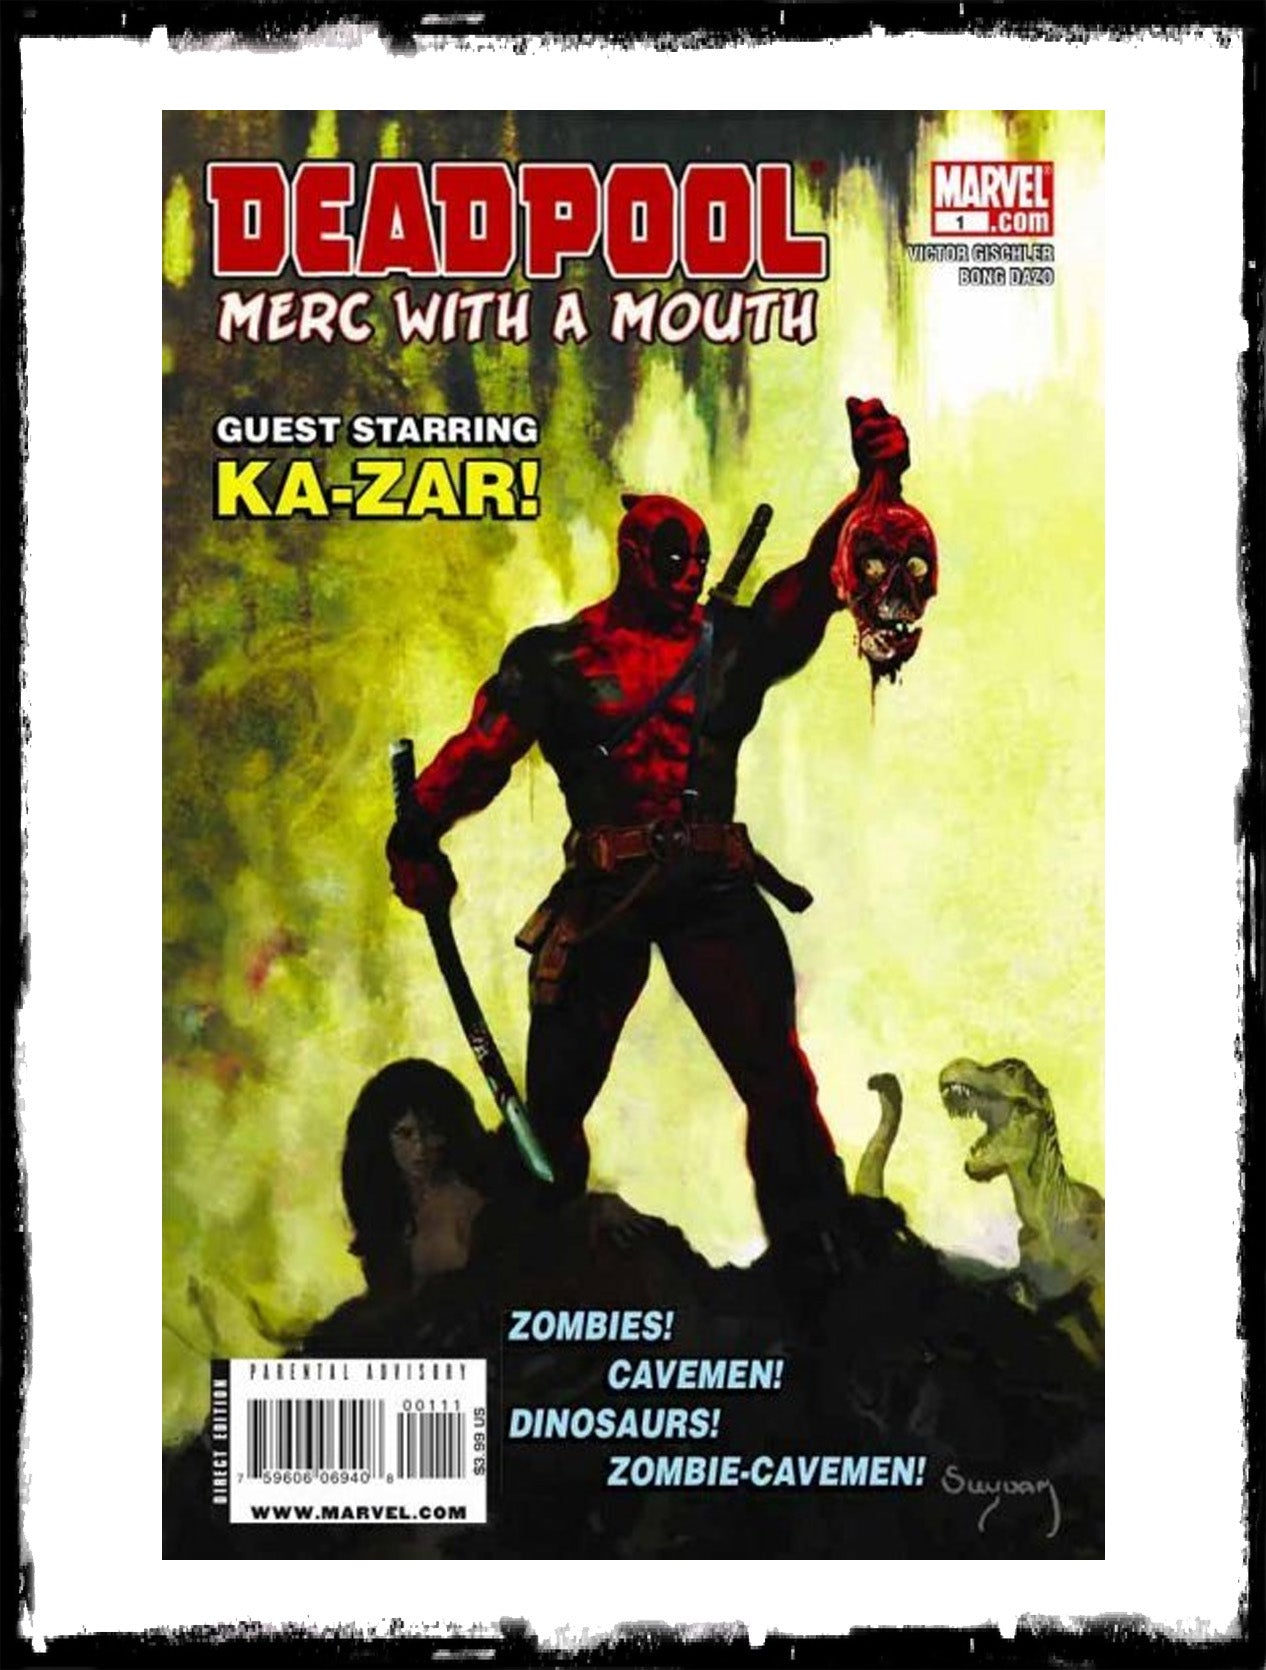 DEADPOOL: MERC WITH A MOUTH - #1 SAVAGE TALES #1 HOMAGE (2009 - NM)